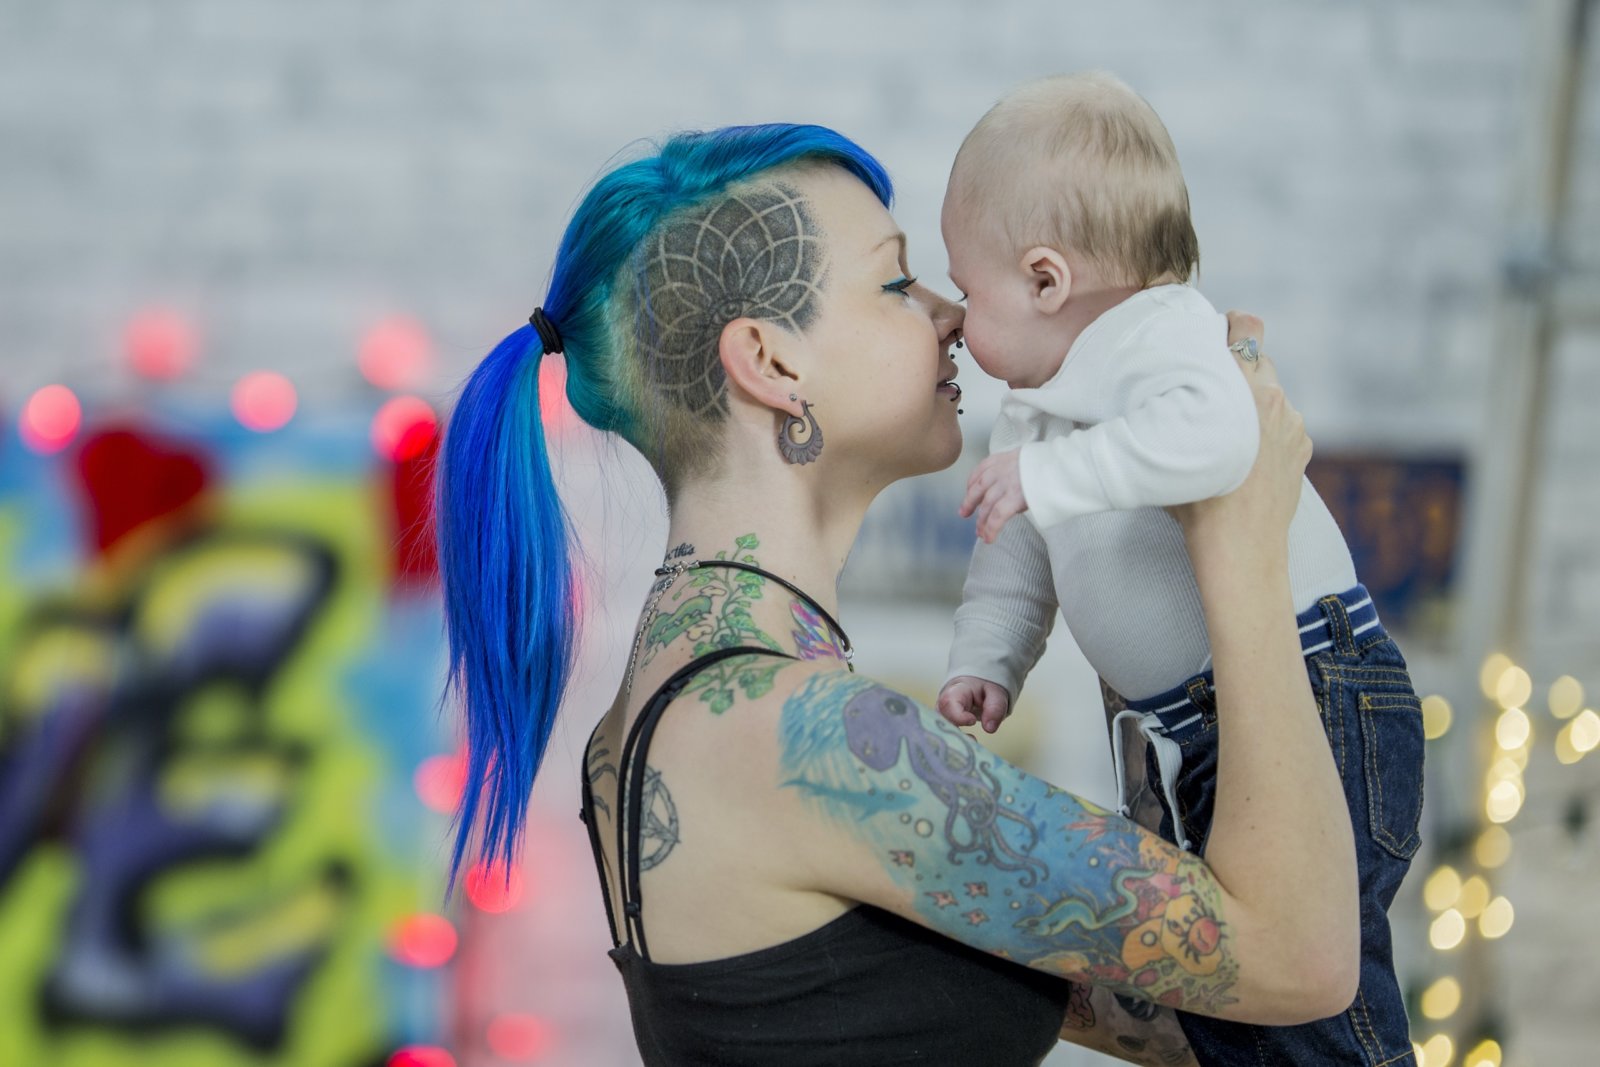 a heavily tattooed girl tenderly holding an infant